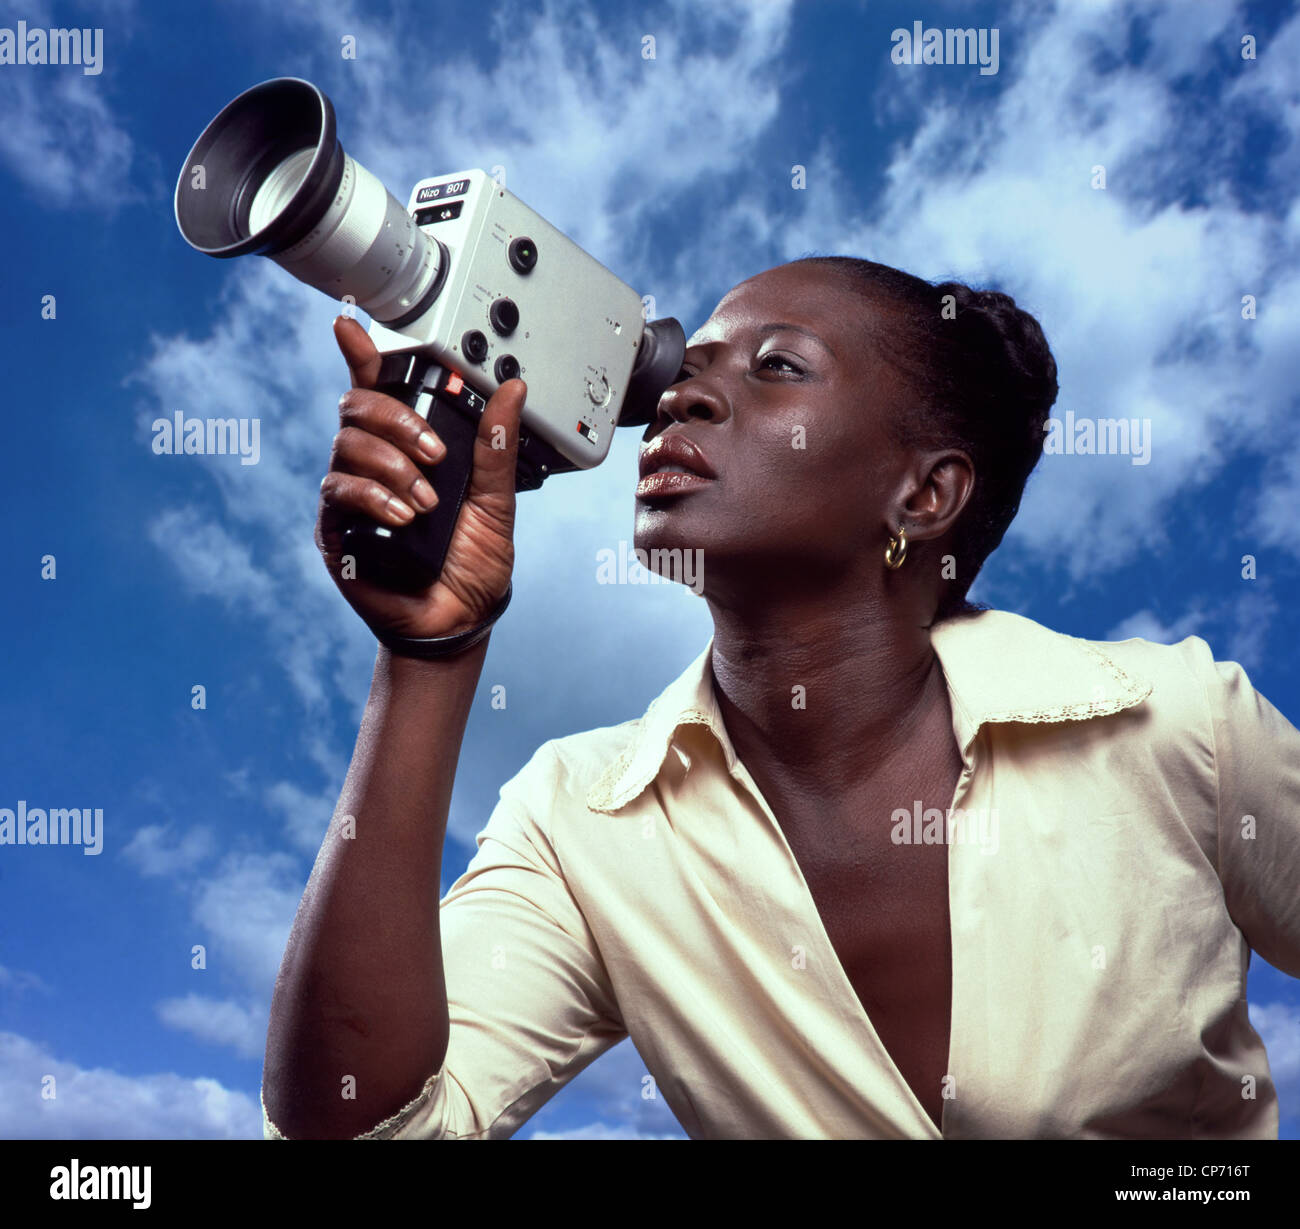 A Black woman shooting with a Super 8 camera Stock Photo